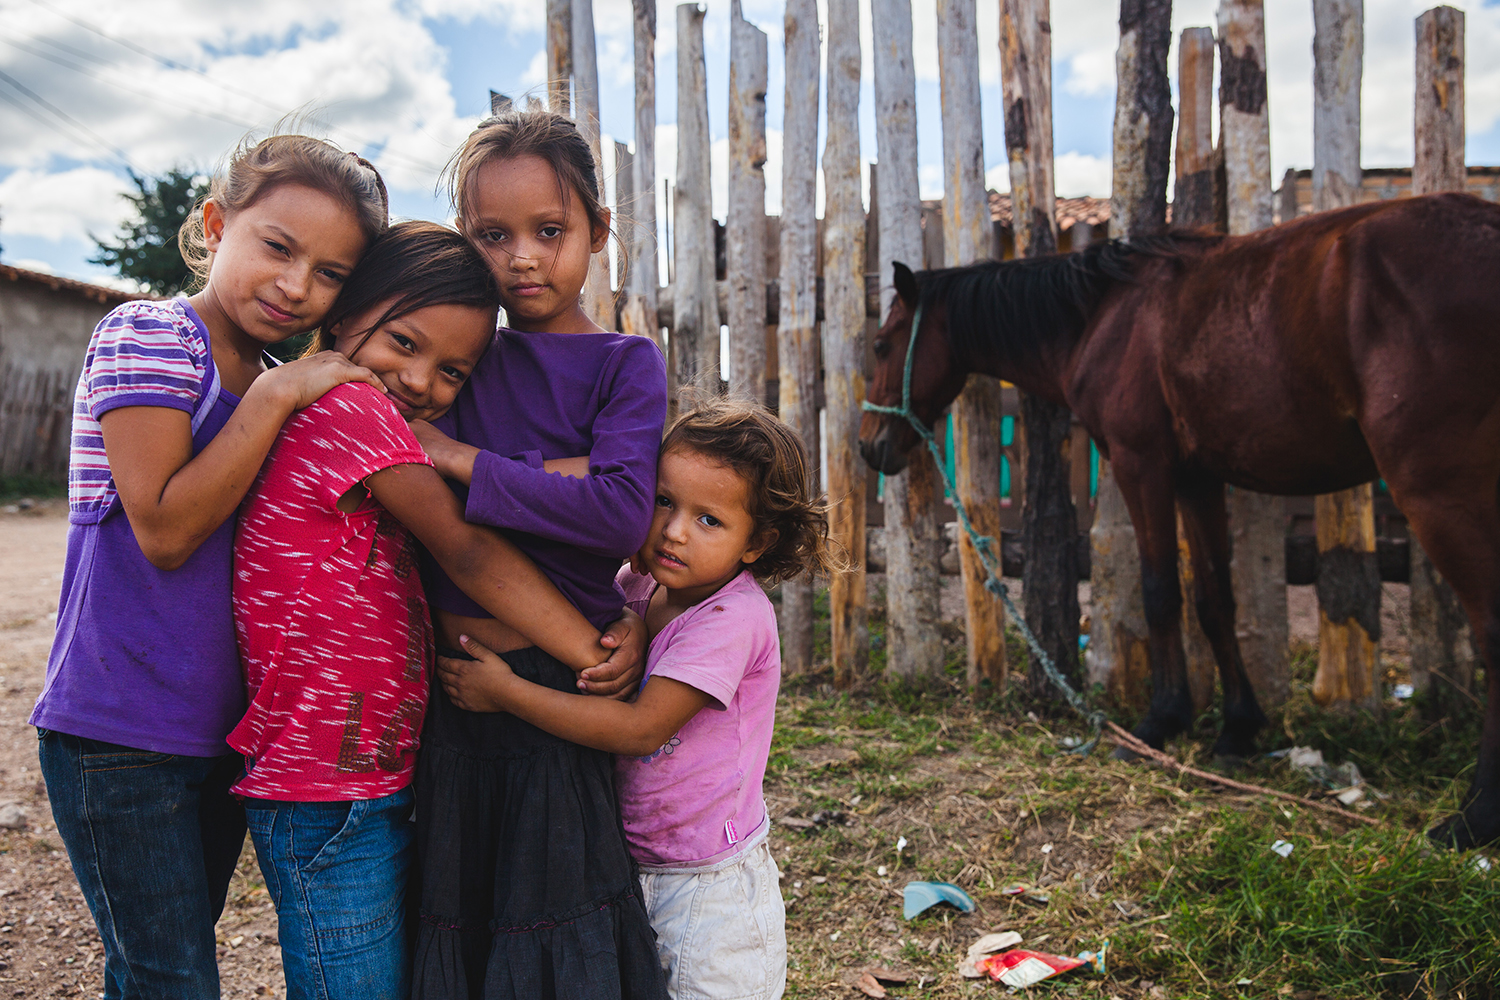 Four young girls hold one another looking at the camera with a horse in front of a fence in the background.